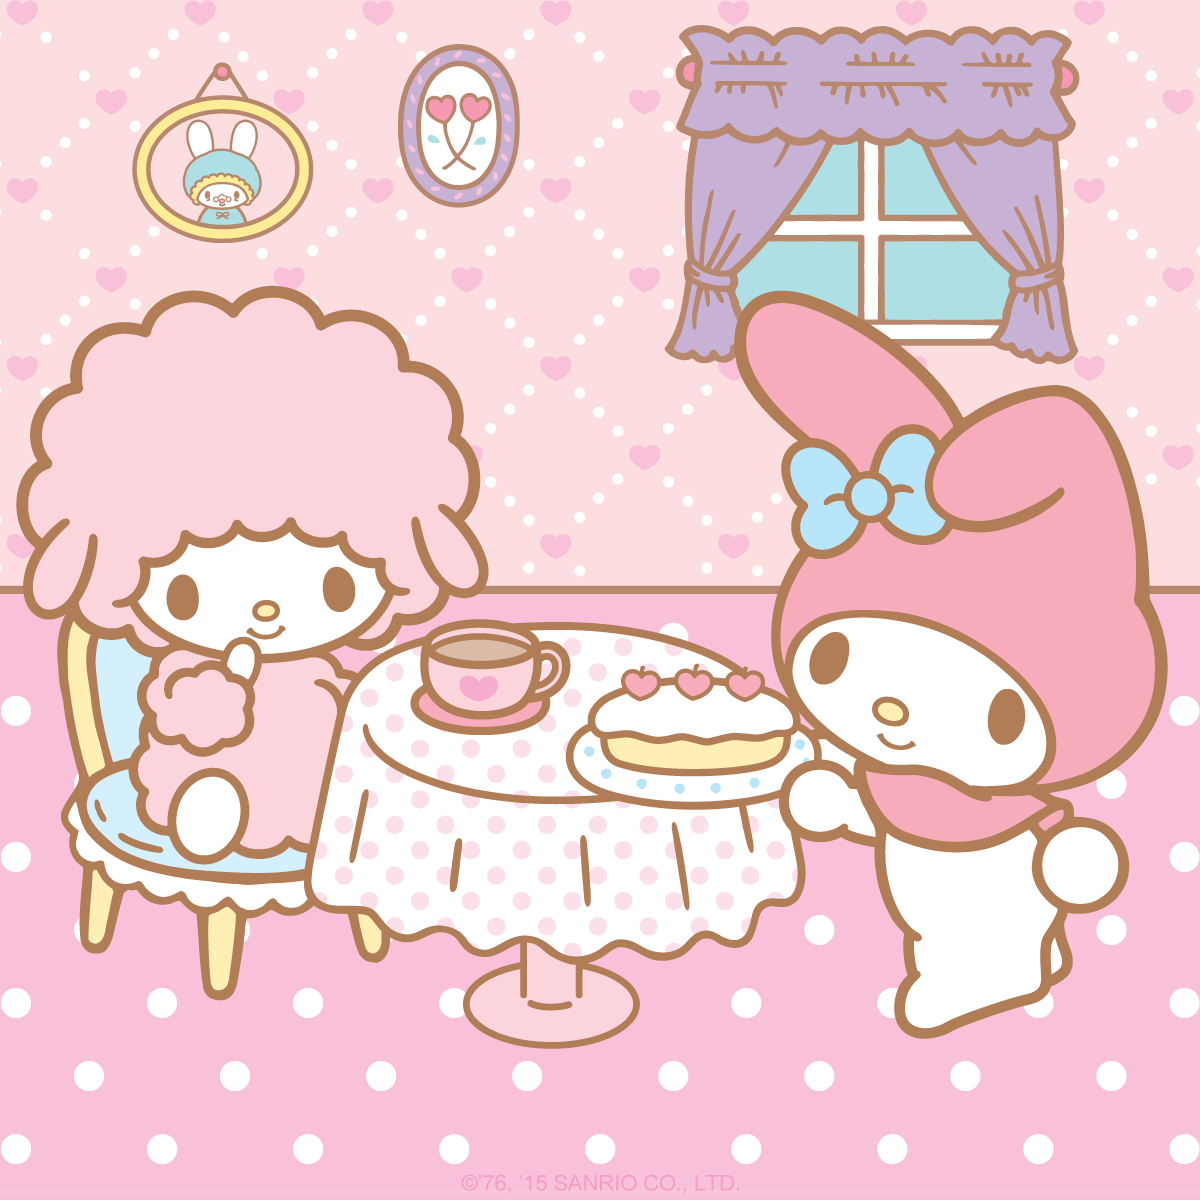 🏳️‍⚧️⚢ my melody daily ♡🏳️‍🌈 (@dailymymelody) on Twitter photo 2023-05-28 17:45:00